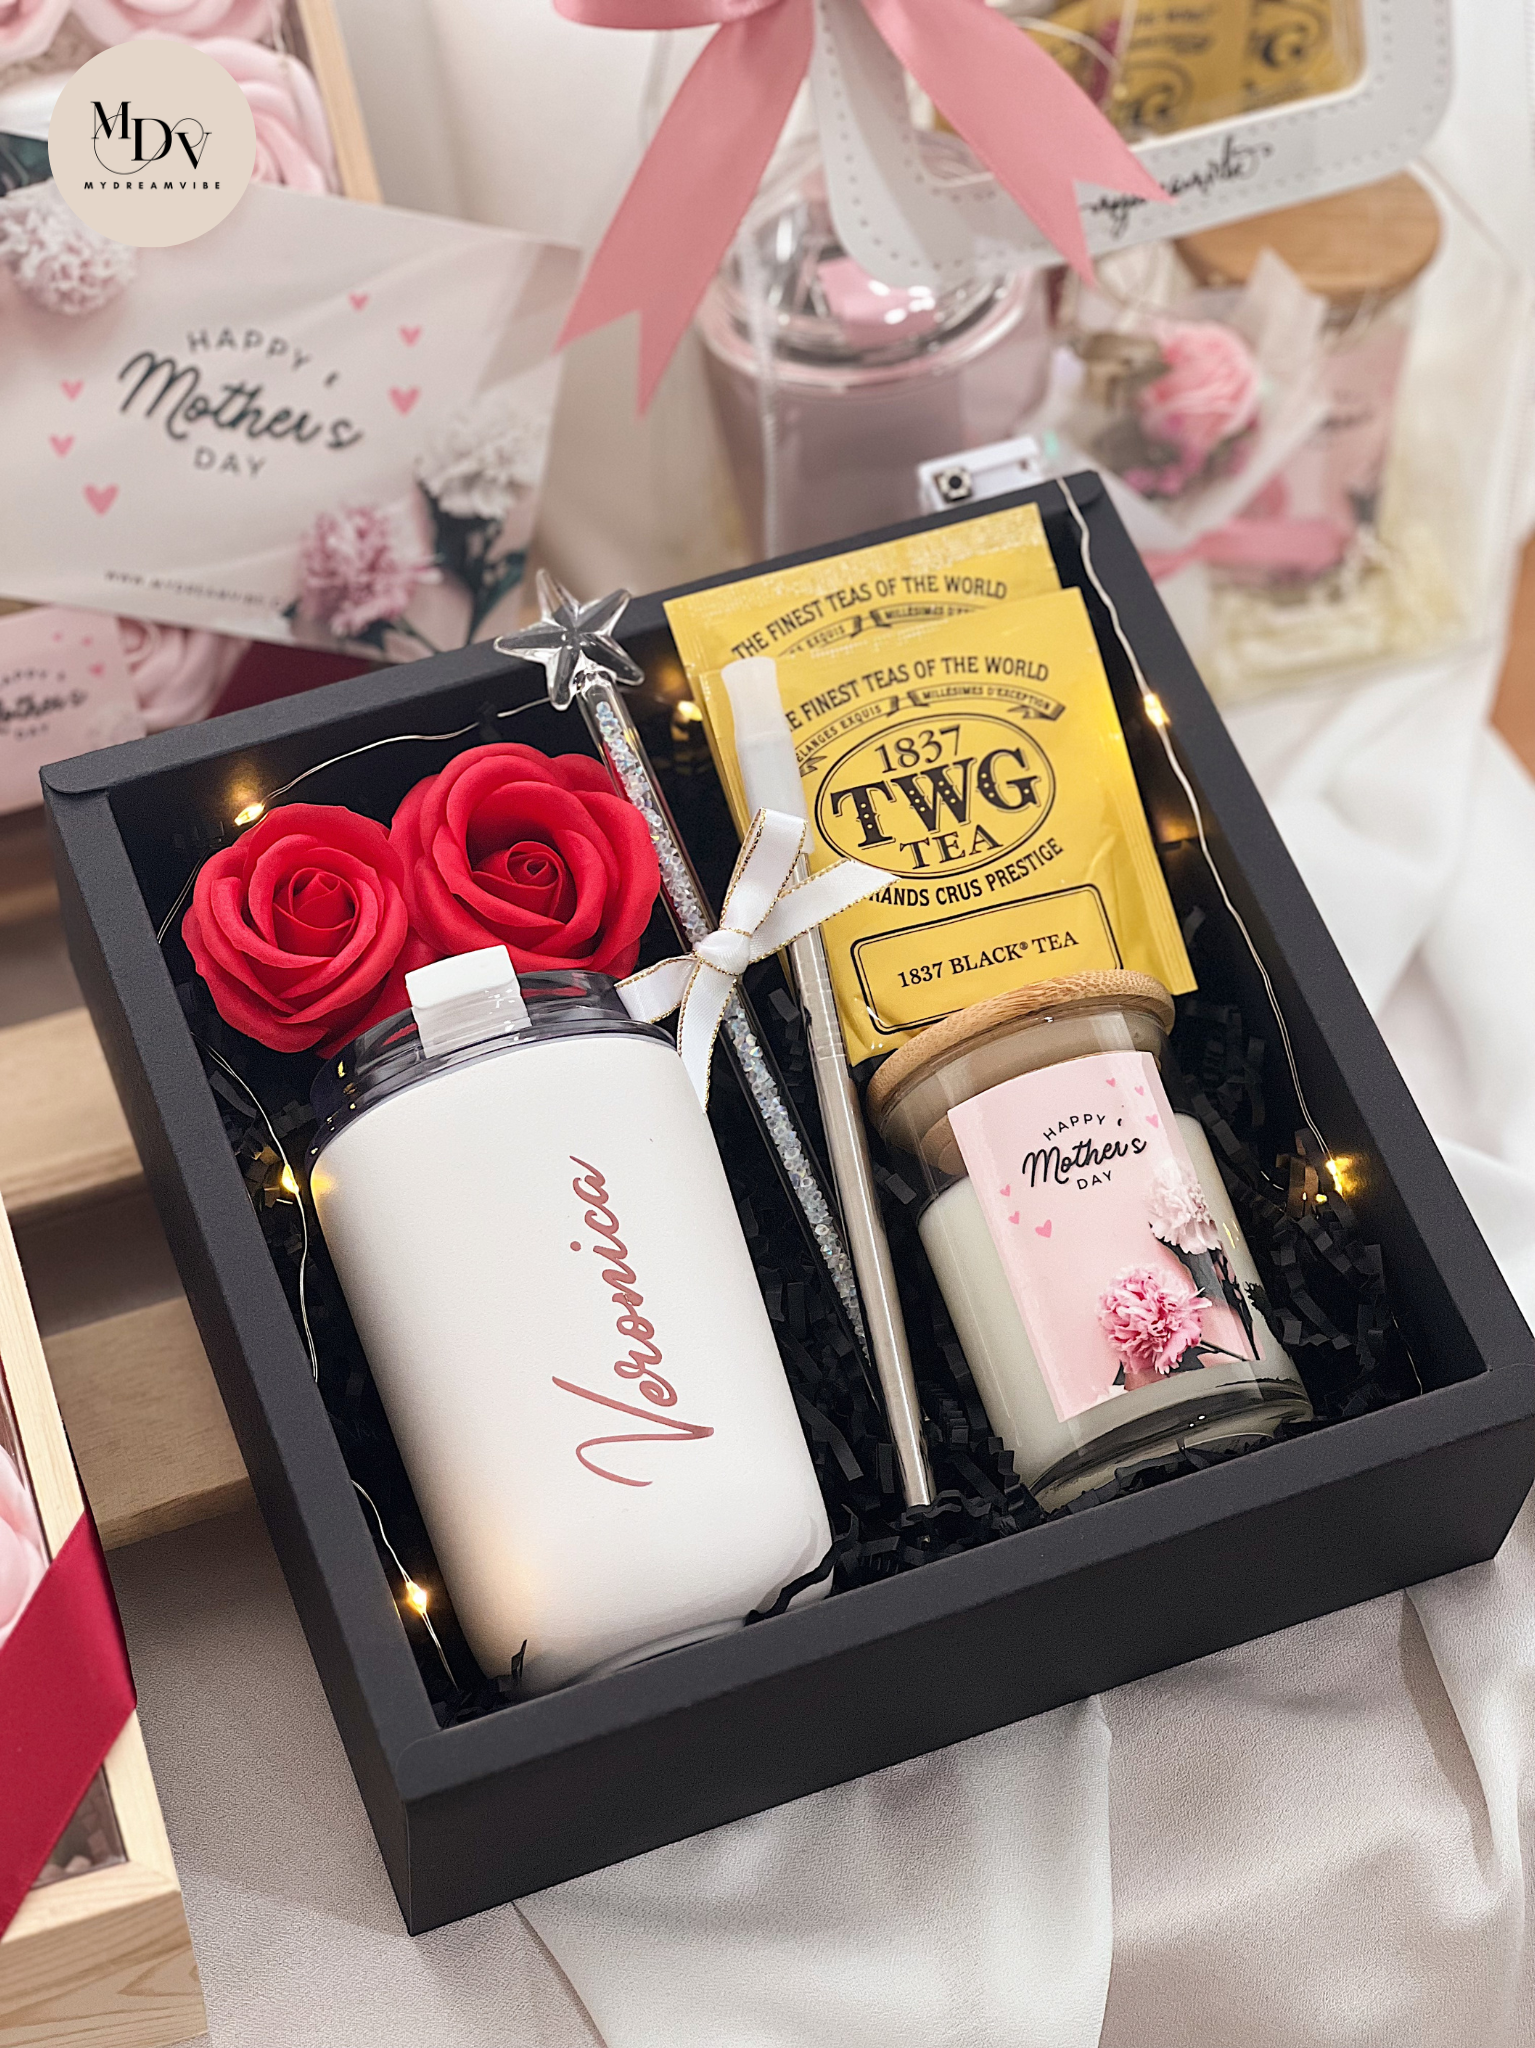 "Star of the Night" Mum, You're my Best Tea (Bestie)! - Mother's Day Gift Set